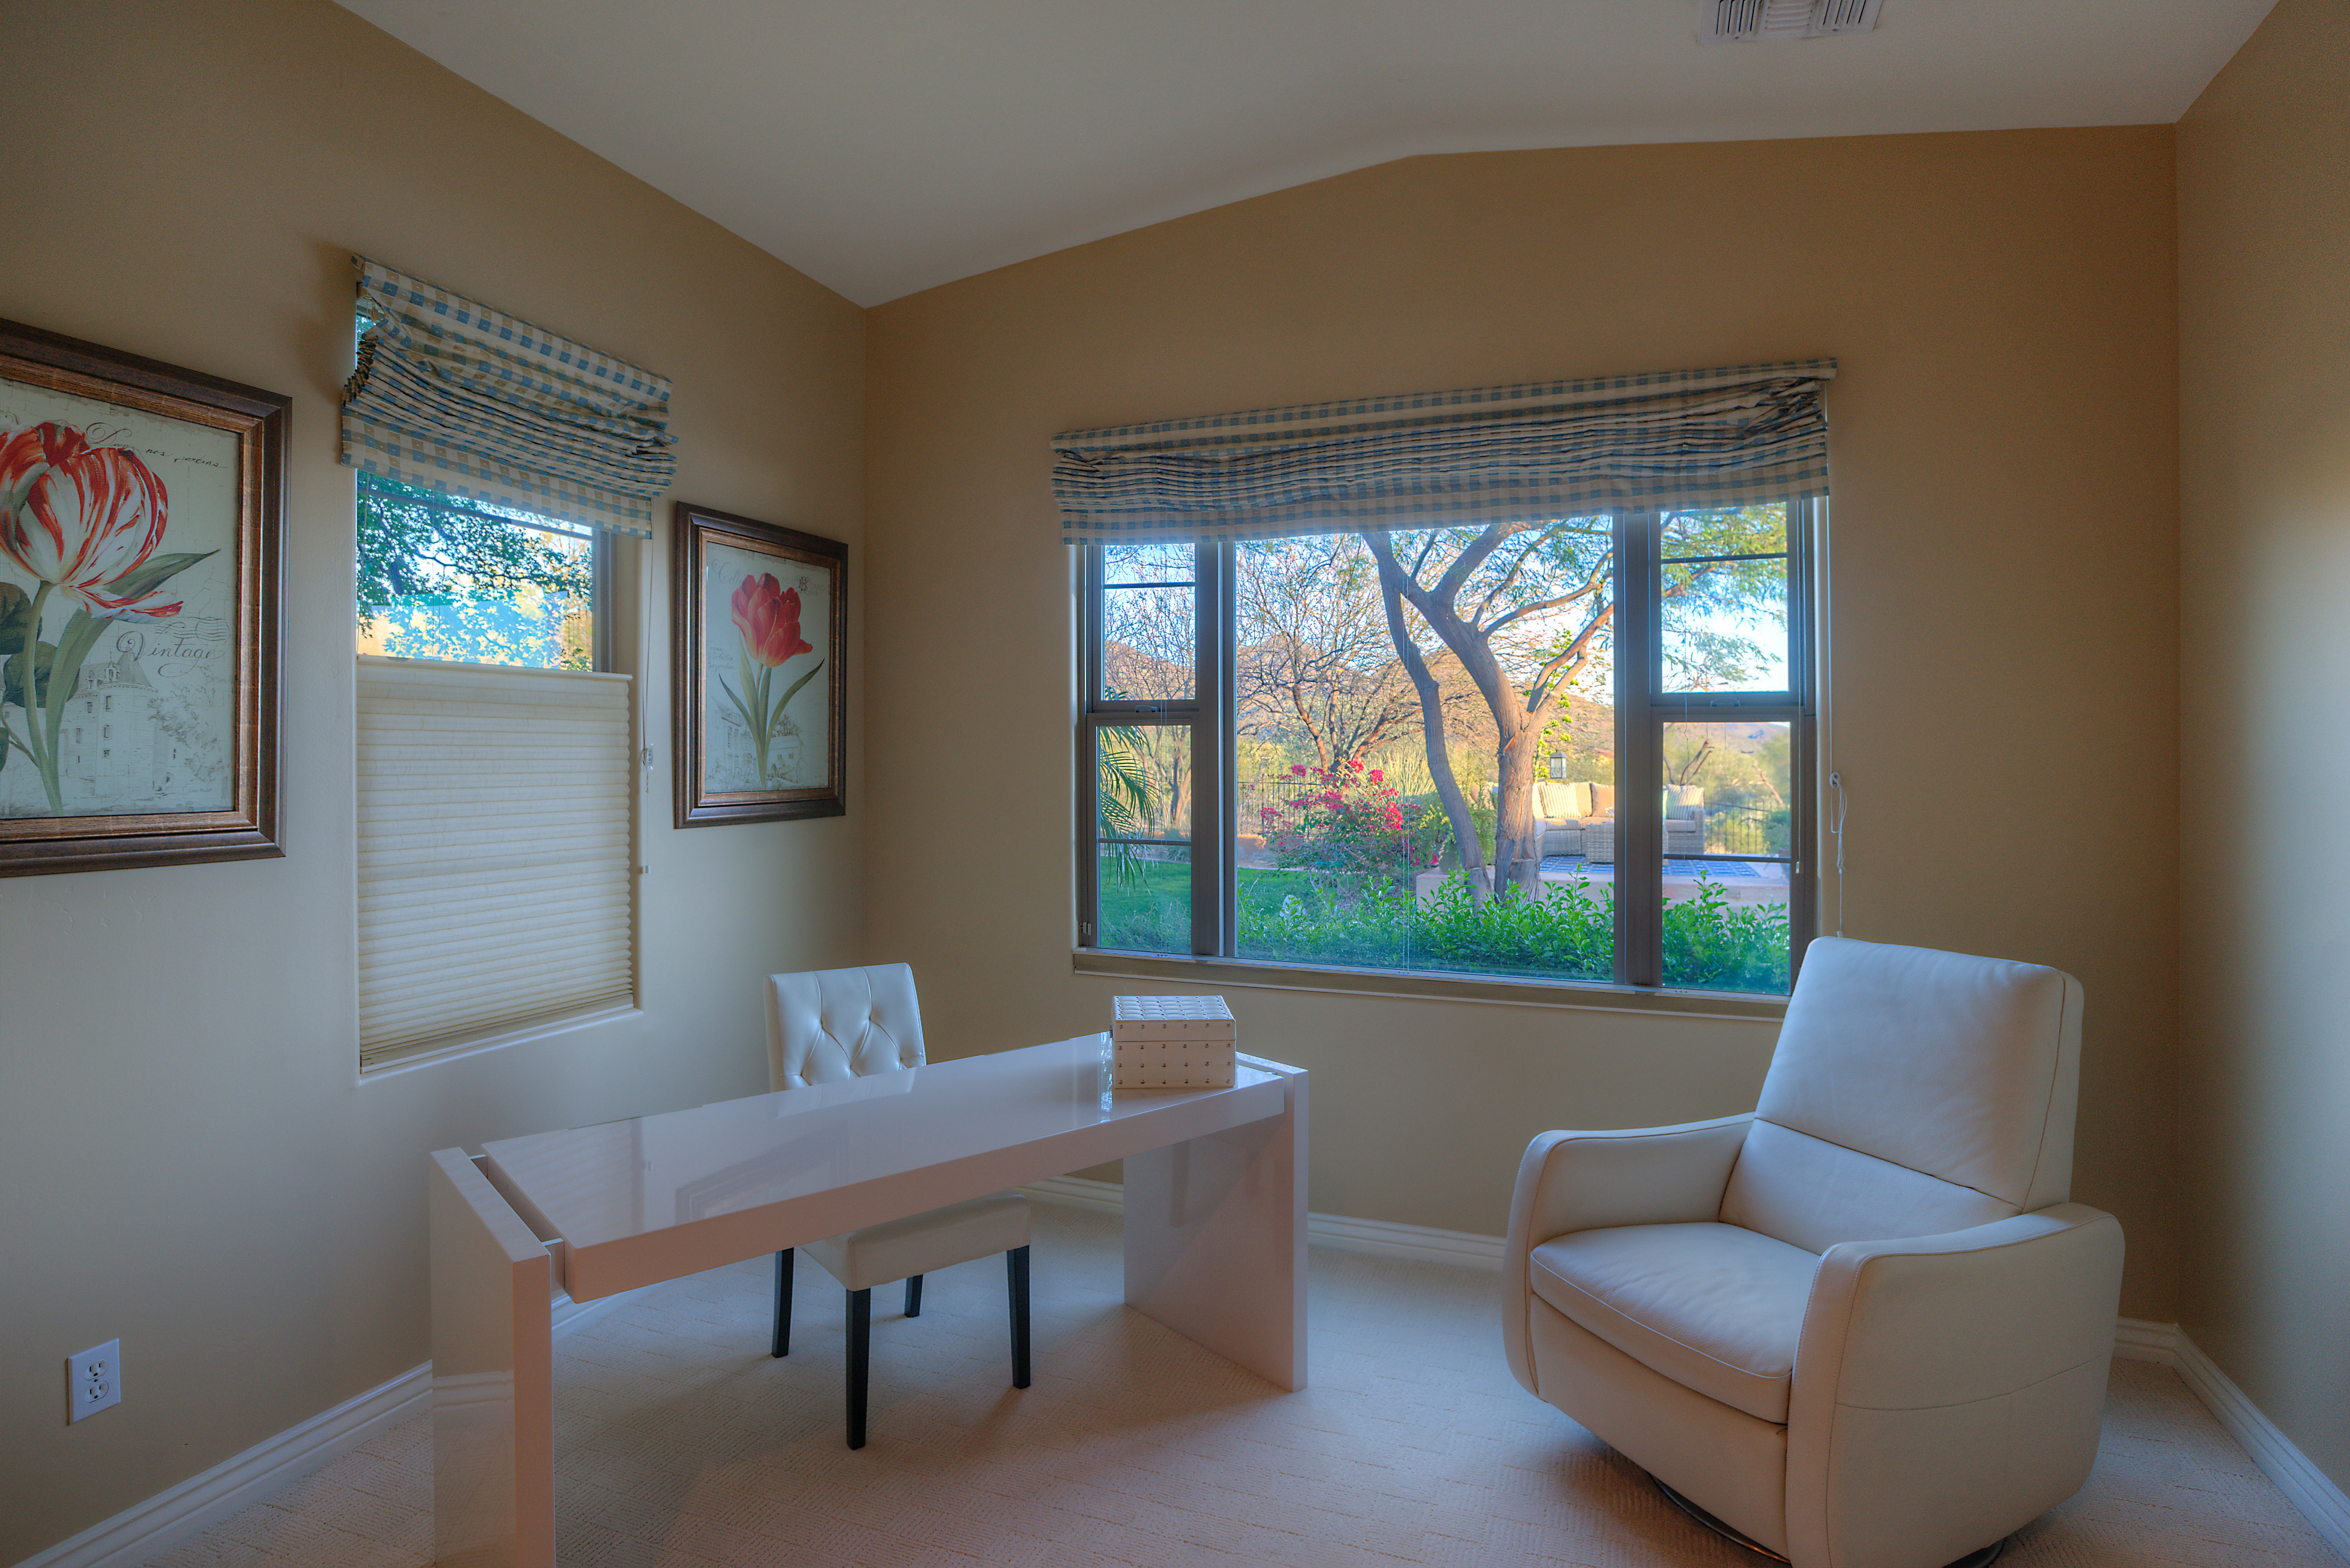 Quiet sitting area at this Scottsdale home for sale in DC Ranch located at 19829 N 97th Pl Scottsdale, AZ 85255 listed by Don Matheson at The Matheson Team